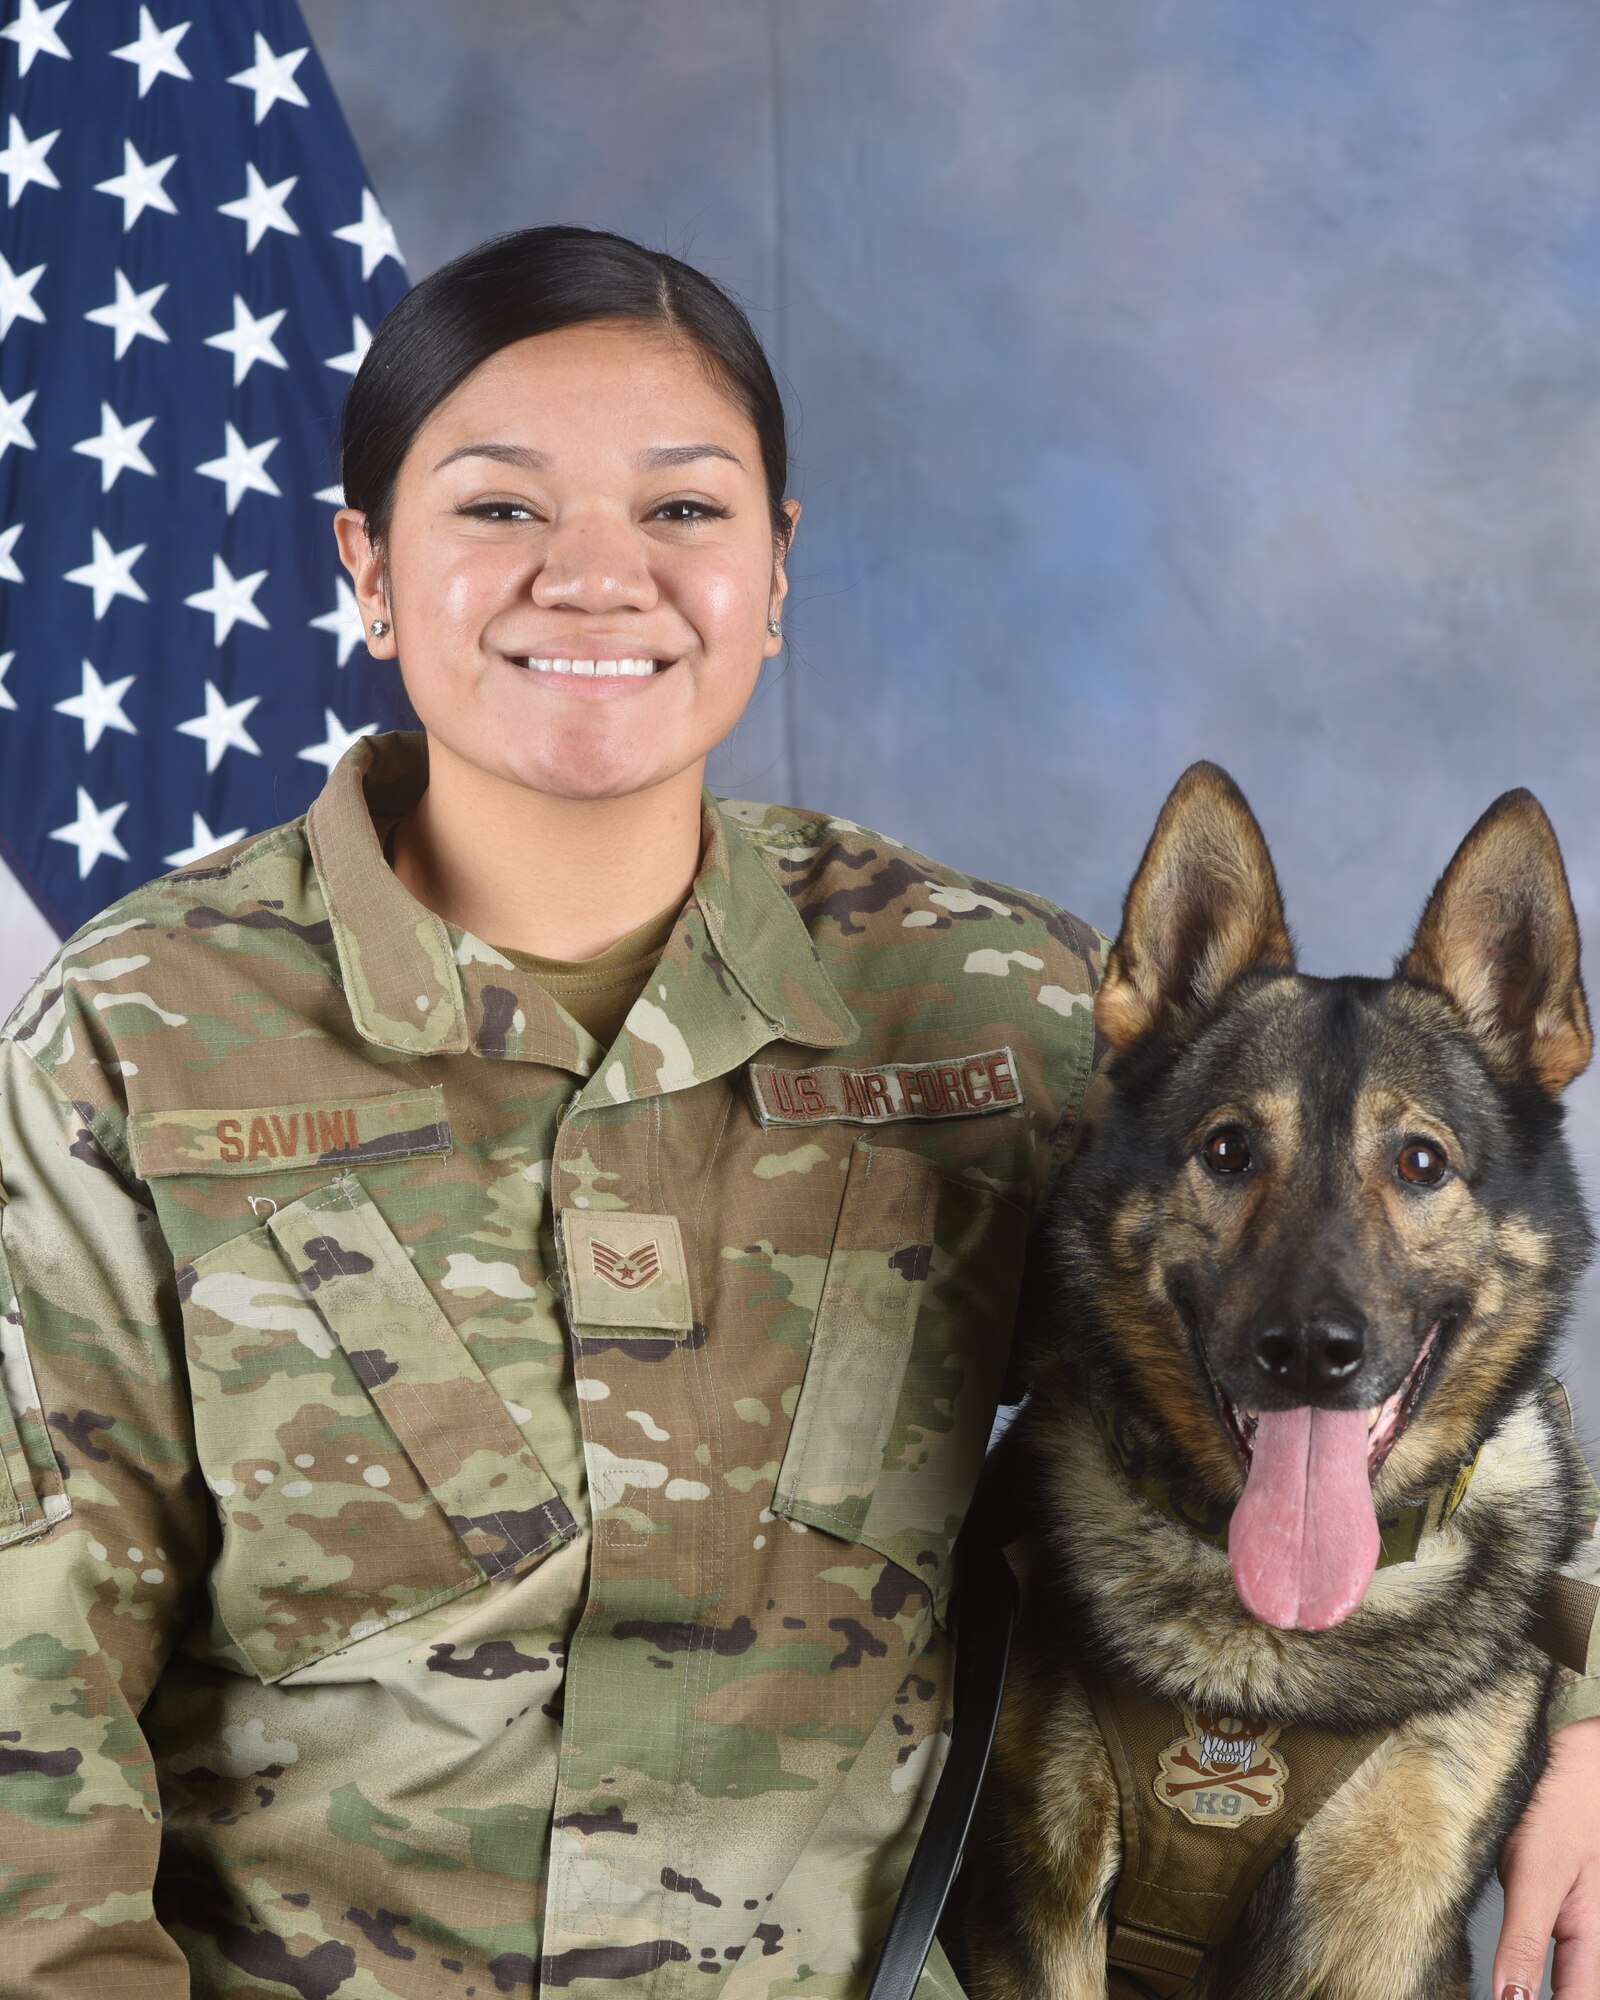 U.S. Air Force Staff Sgt. Destiny Savini, 97th Security Forces Squadron (SFS) military working dog (MWD) handler, poses for an official photo with Bingo, 97th SFS MWD at Altus Air Force Base, Oklahoma, February 1, 2023. Bingo has been assigned to the 97th Air Mobility Wing since 2019. (U.S. Air Force photo by Senior Airman Kayla Christenson)